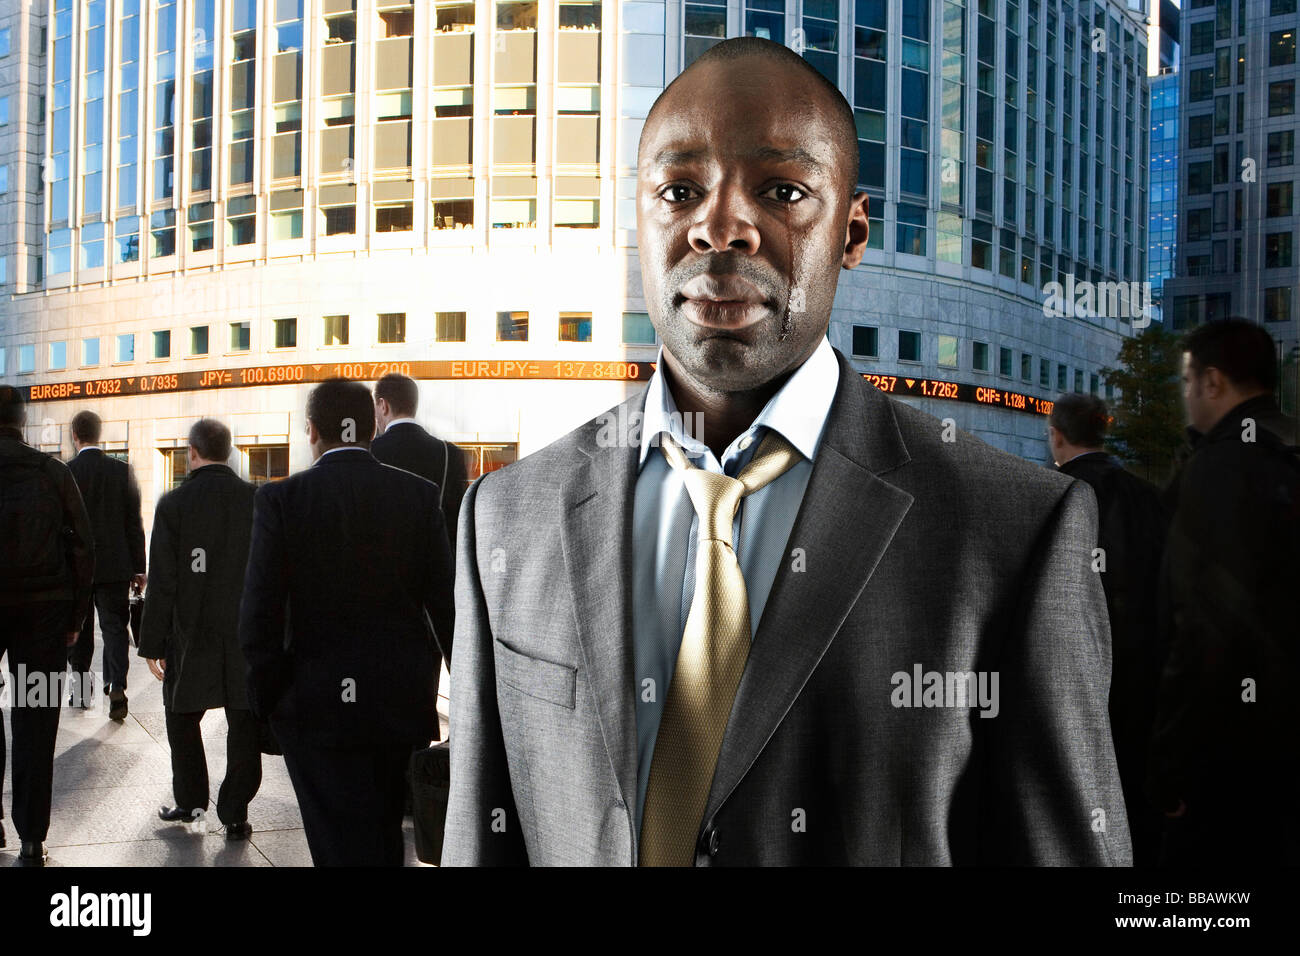 Suited businessman crying Stock Photo